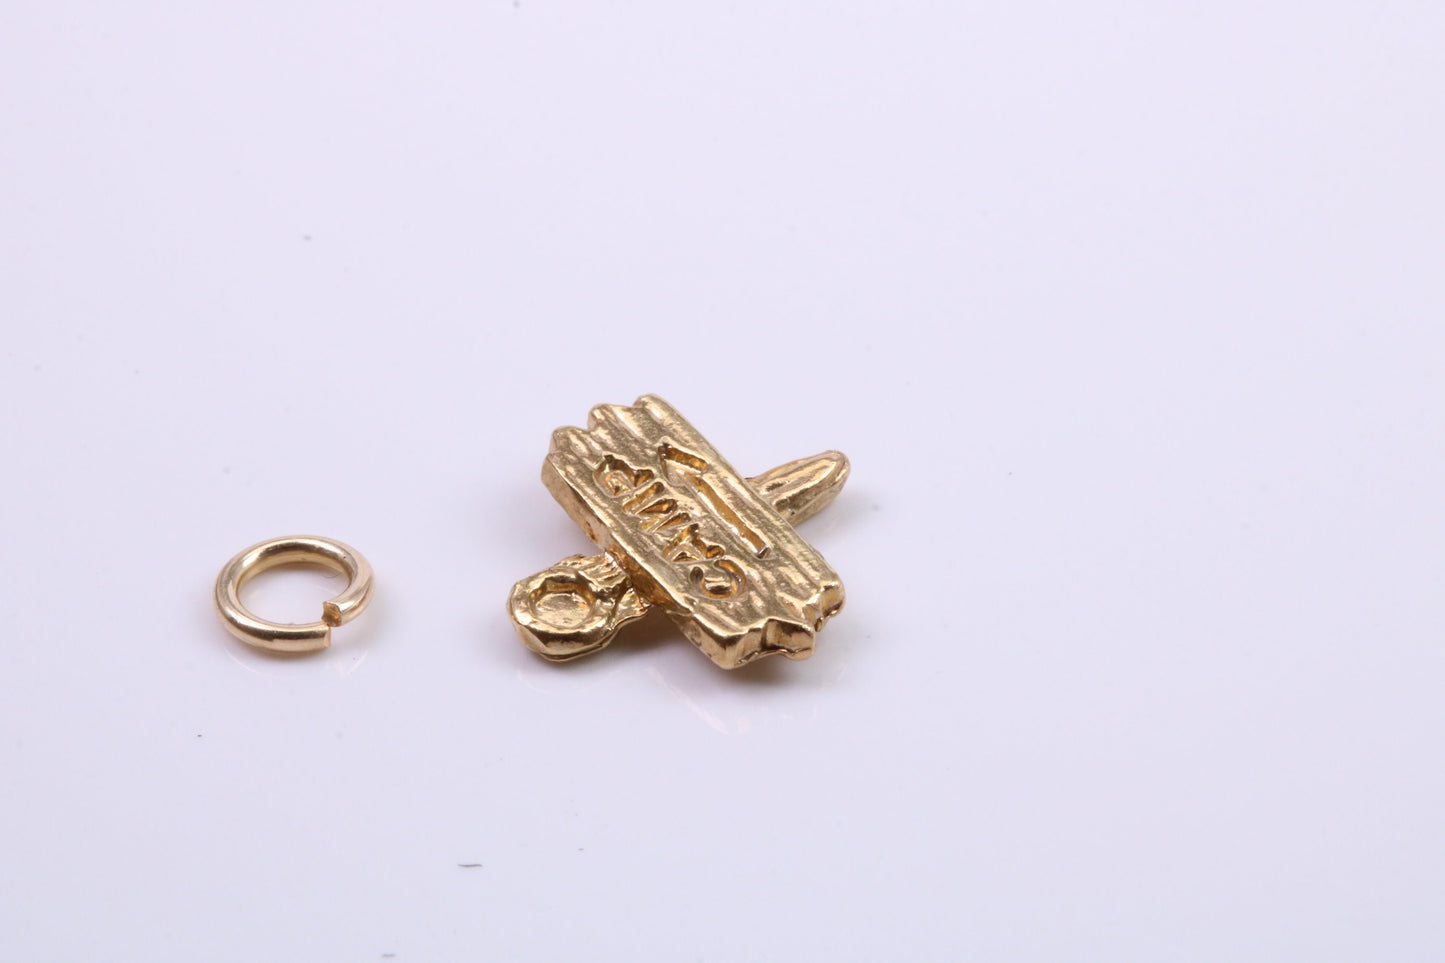 Camping Charm, Traditional Charm, Made from Solid 9ct Yellow Gold, British Hallmarked, Complete with Attachment Link